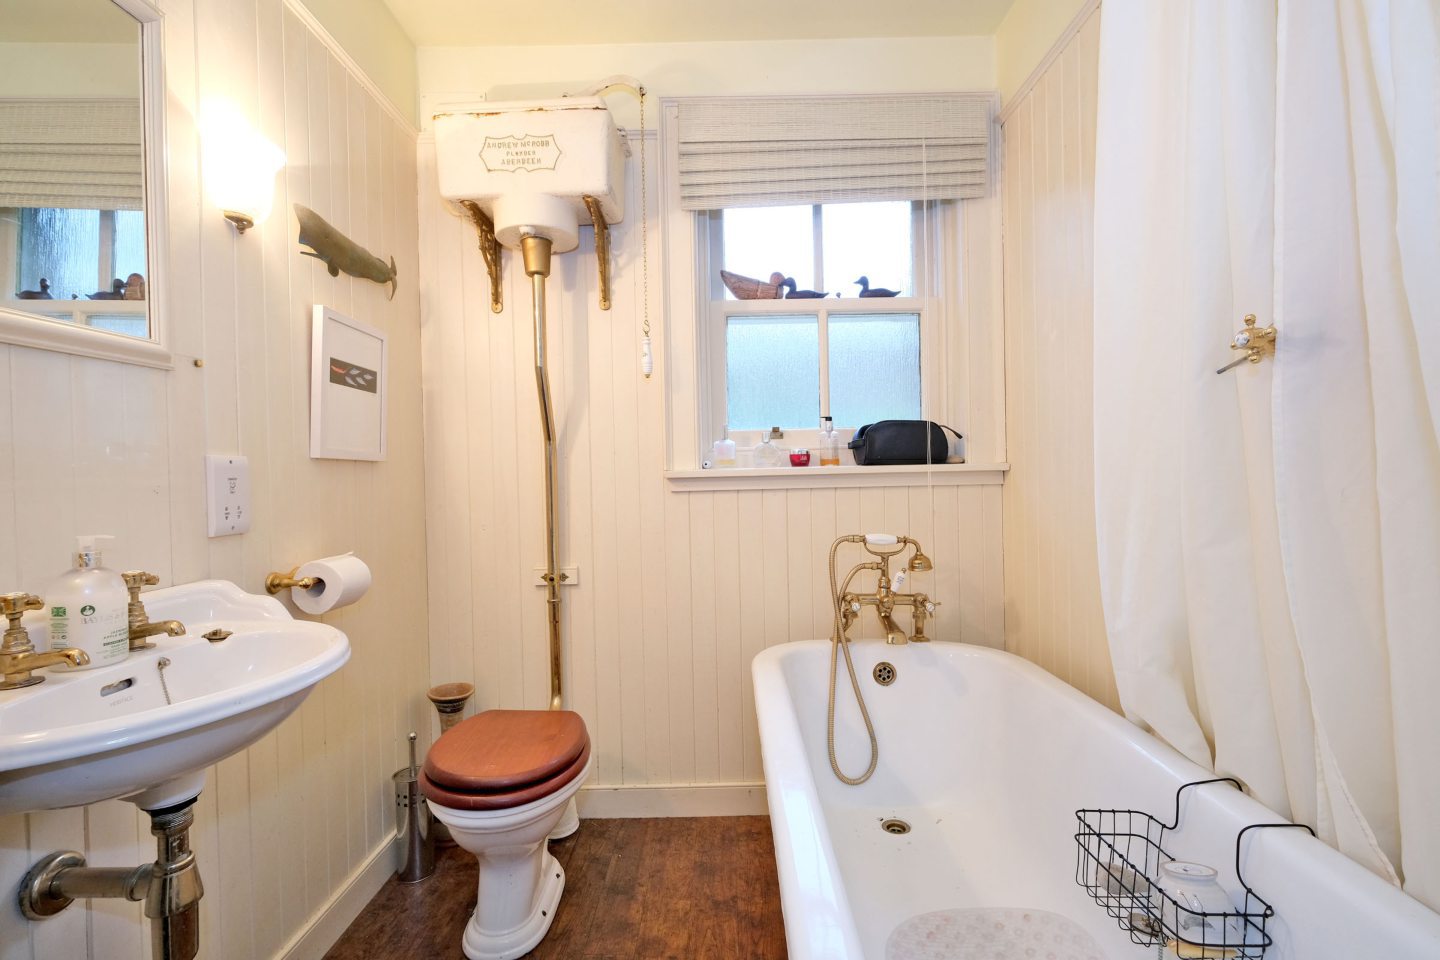 Traditional bathroom in the artist's Aberdeen home, featuring high cistern and freestanding oval bath.